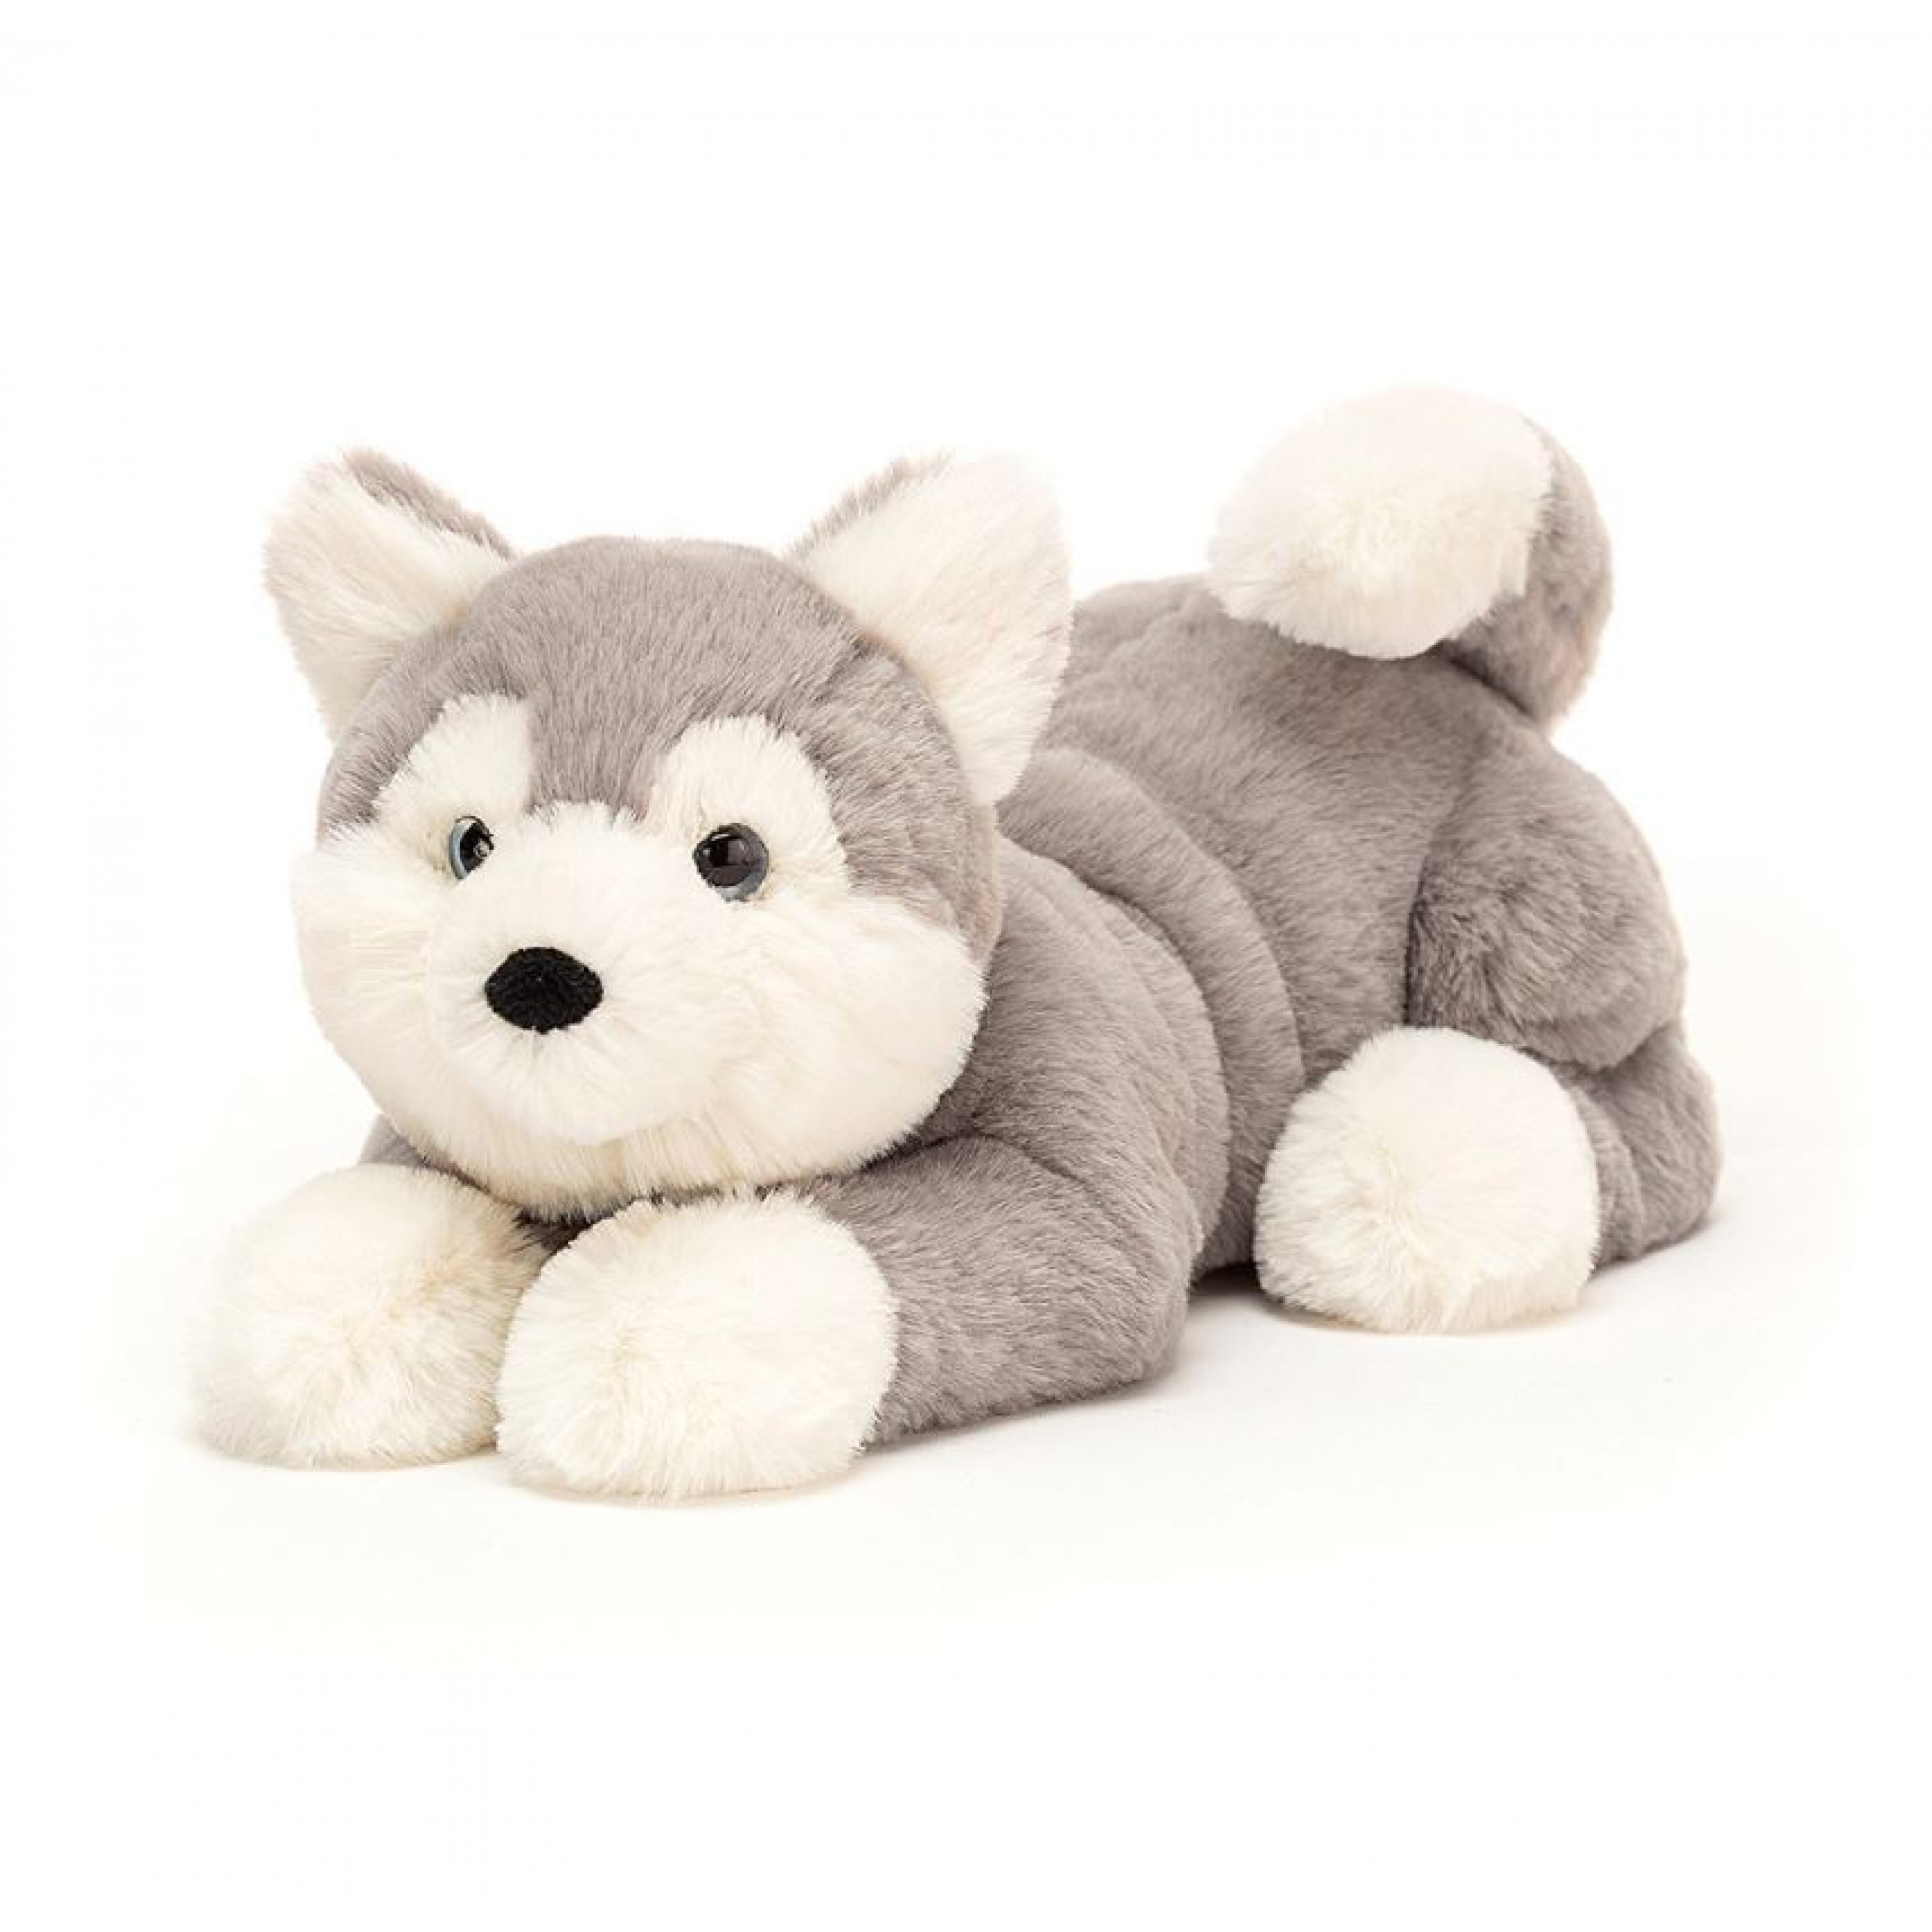 Add on - Jellycat Plushie Limited Edition